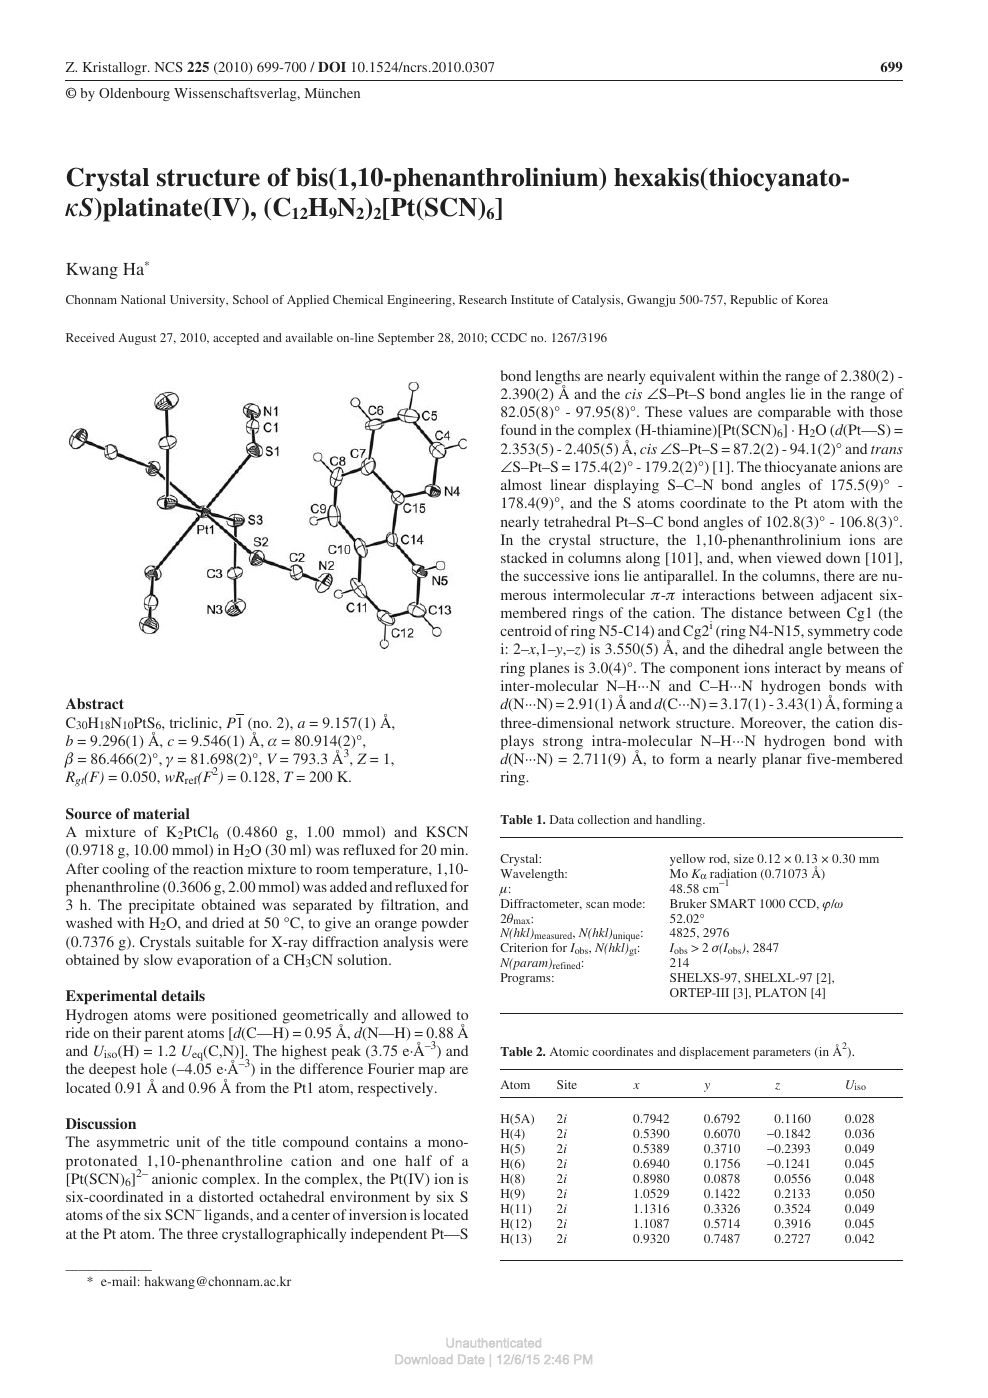 Crystal Structure Of Bis 1 10 Phenanthrolinium Hexakis Thiocyanato Ks Platinate Iv C12h9n2 2 Pt Scn 6 Topic Of Research Paper In Chemical Sciences Download Scholarly Article Pdf And Read For Free On Cyberleninka Open Science Hub